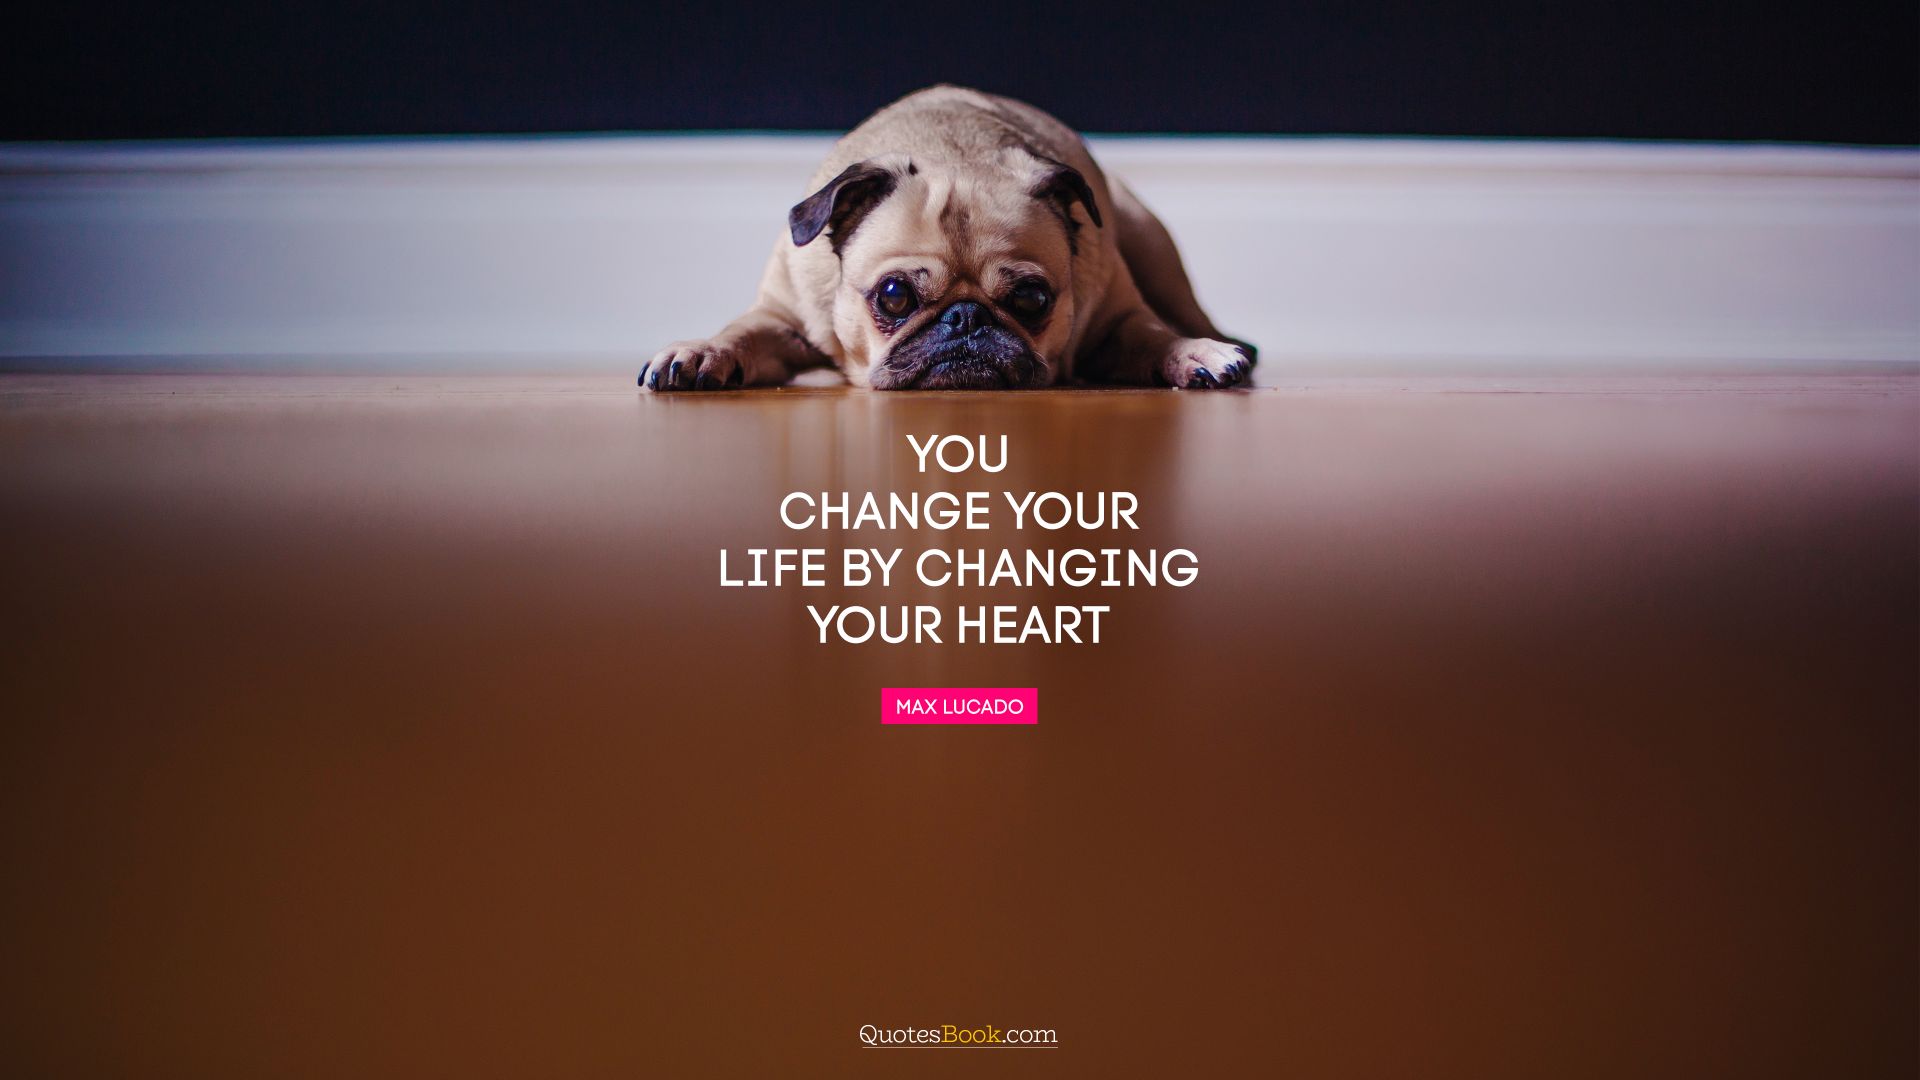 You change your life by changing your heart. - Quote by Max Lucado